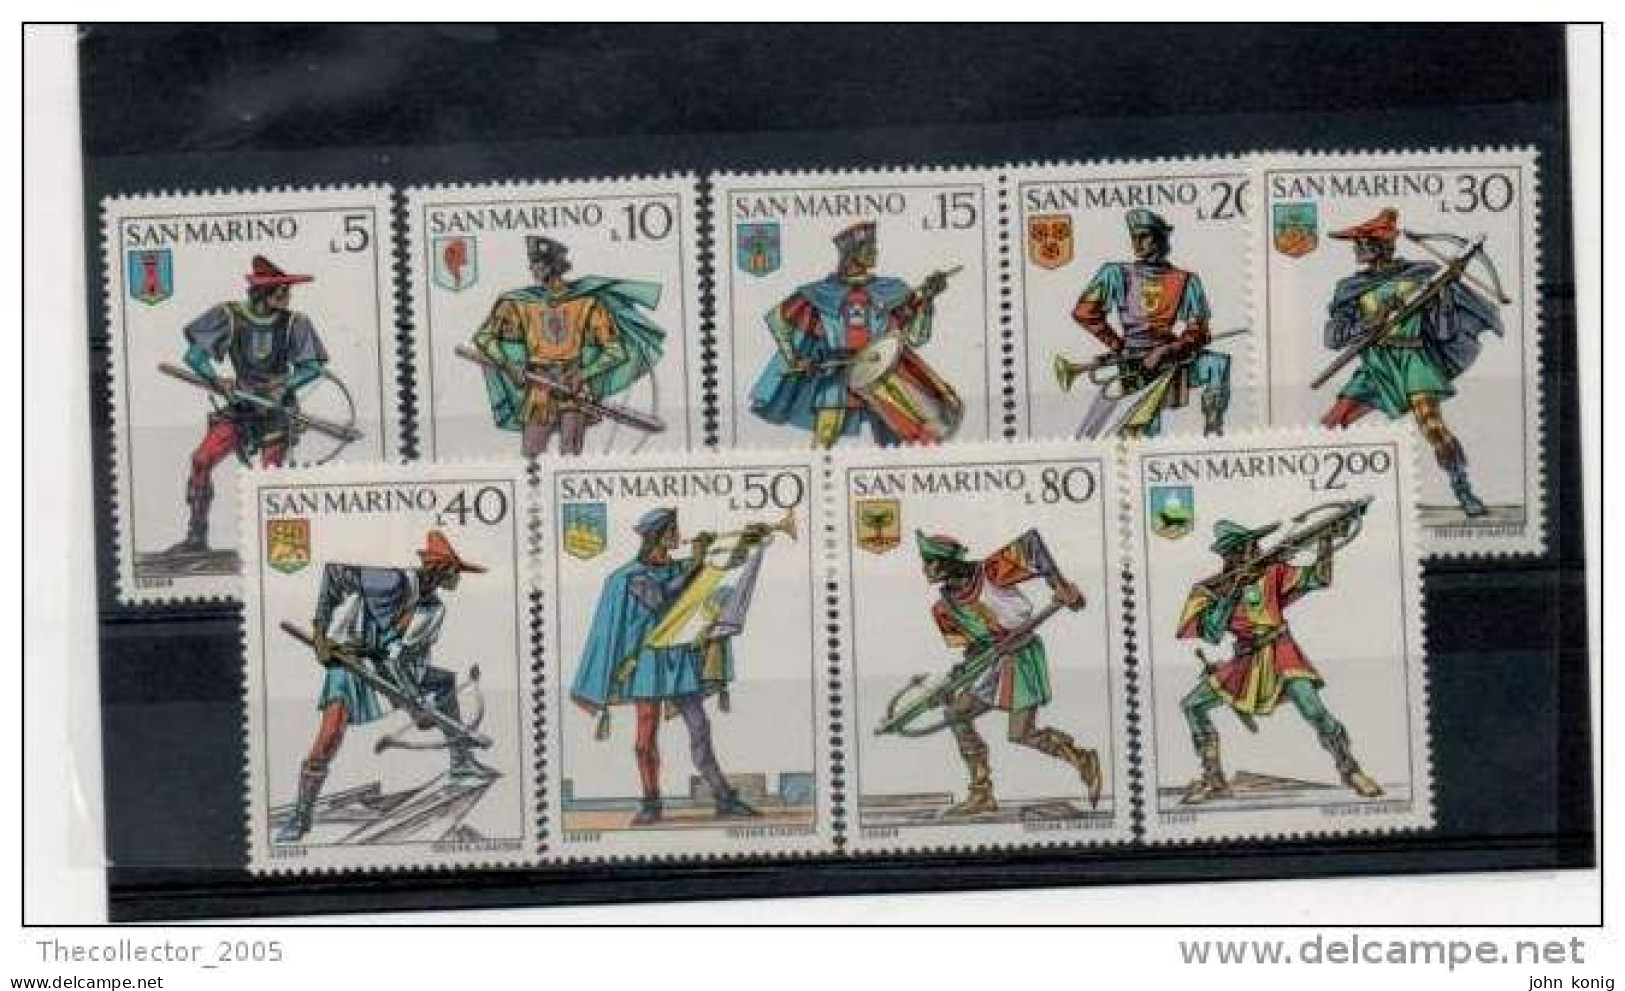 SAN MARINO - LOTTO FRANCOBOLLI NUOVI (VEDI FOTO) - NEW-MINT STAMPS LOT (CROSSBOW GAMES) - Collections, Lots & Séries